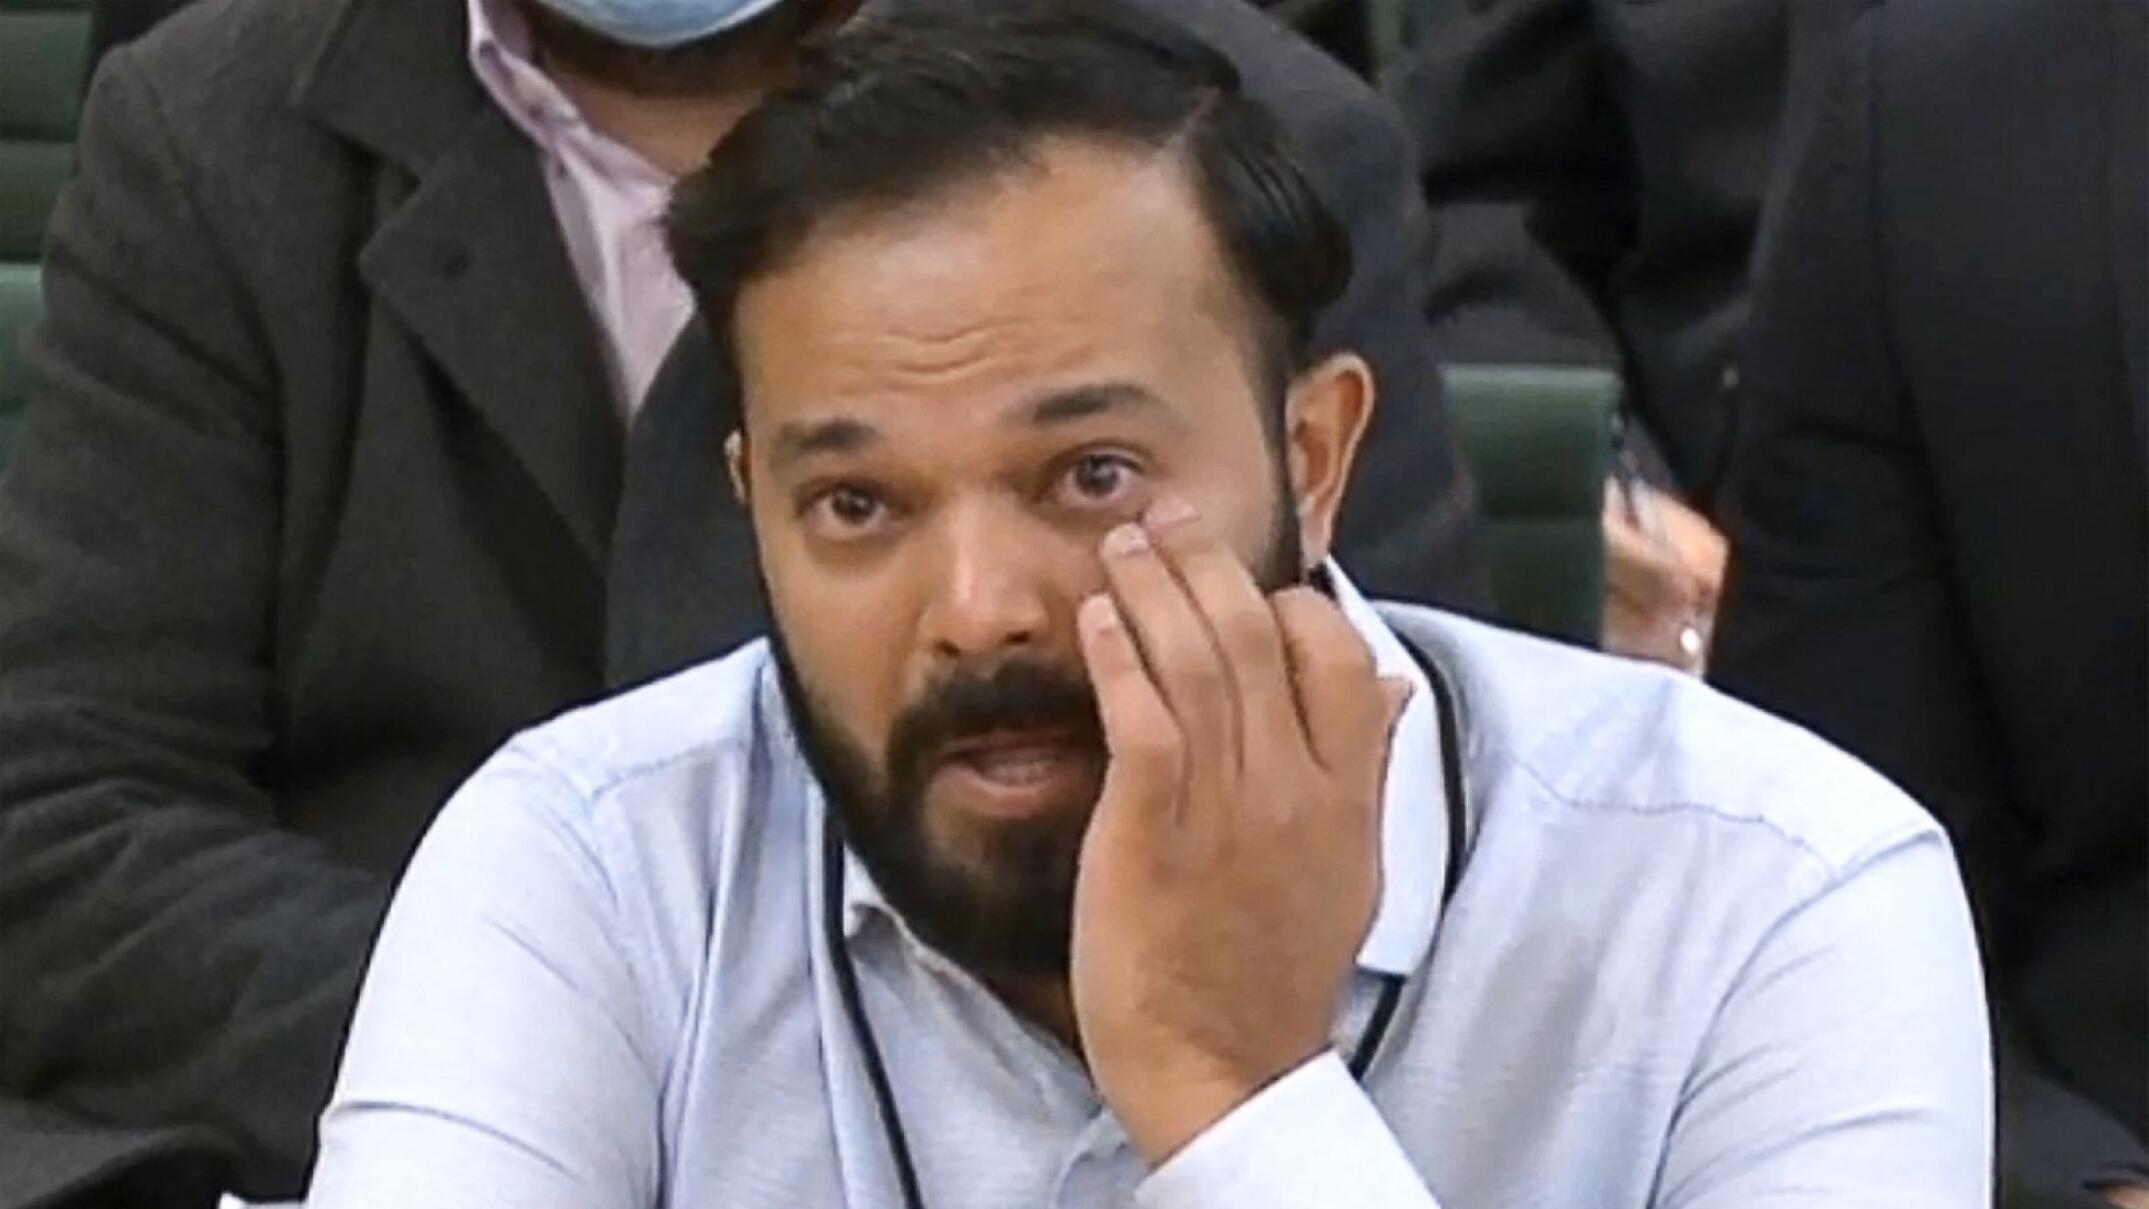 A video grab from footage broadcast by the UK Parliament's Parliamentary Recording Unit (PRU) shows former Yorkshire cricketer Azeem Rafiq fighting back tears while testifying in front of a Digital, Culture, Media and Sport (DCMS) Committee in London on November 16, 2021 as MPs probe racial harassment at the club